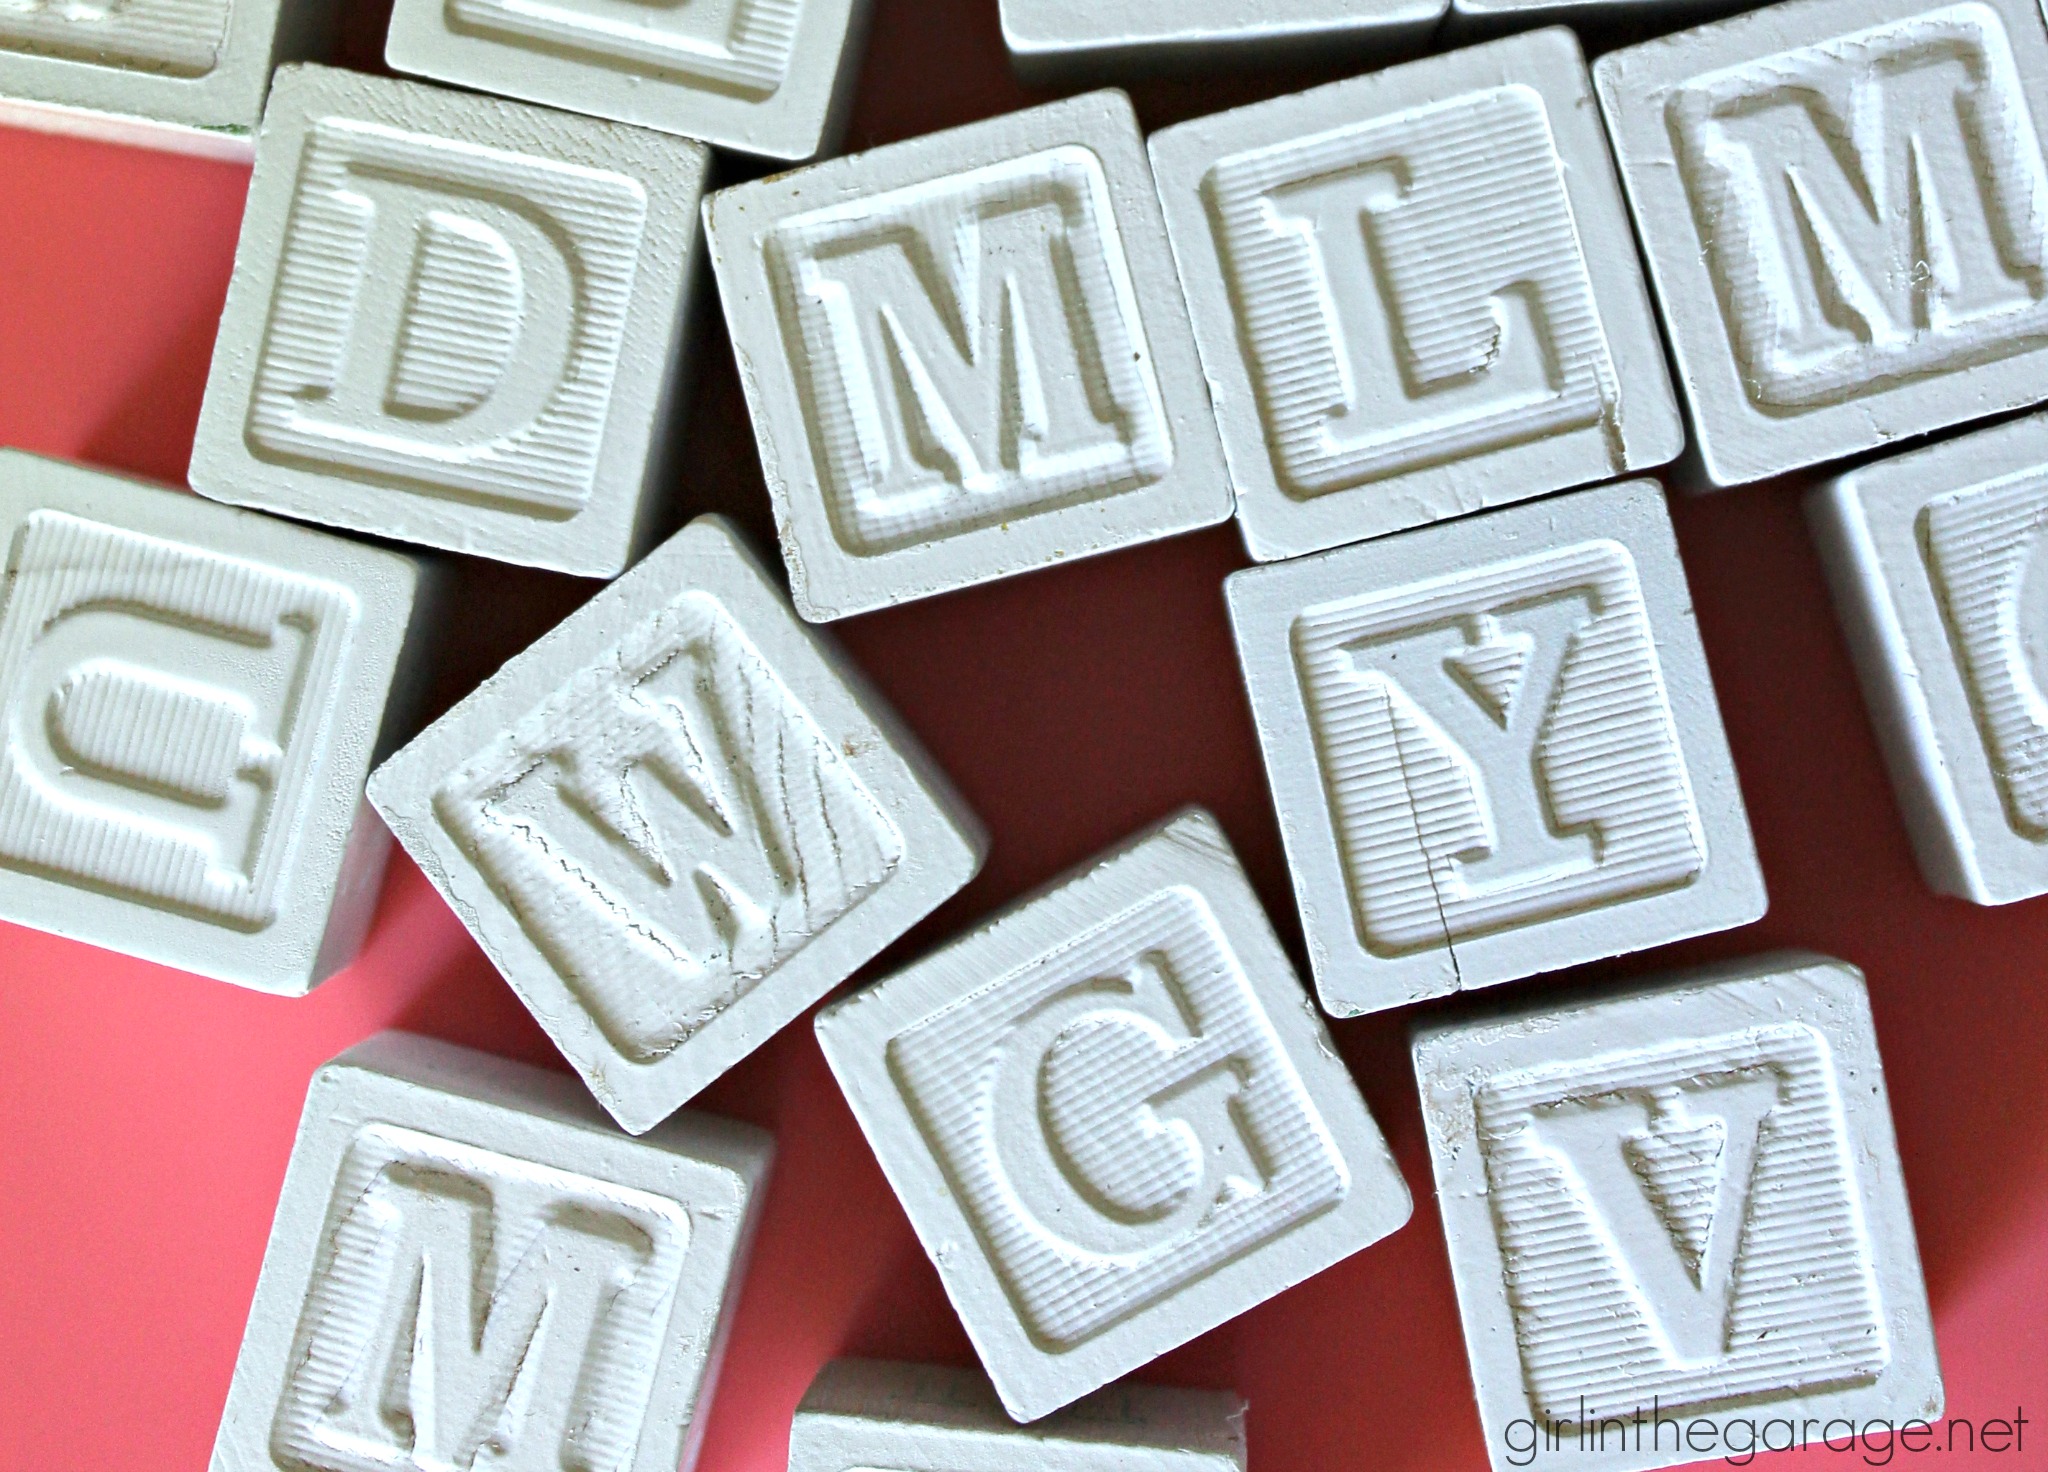 Turn old baby blocks into stylish grown up decor - display meaningful messages in your home. By Girl in the Garage